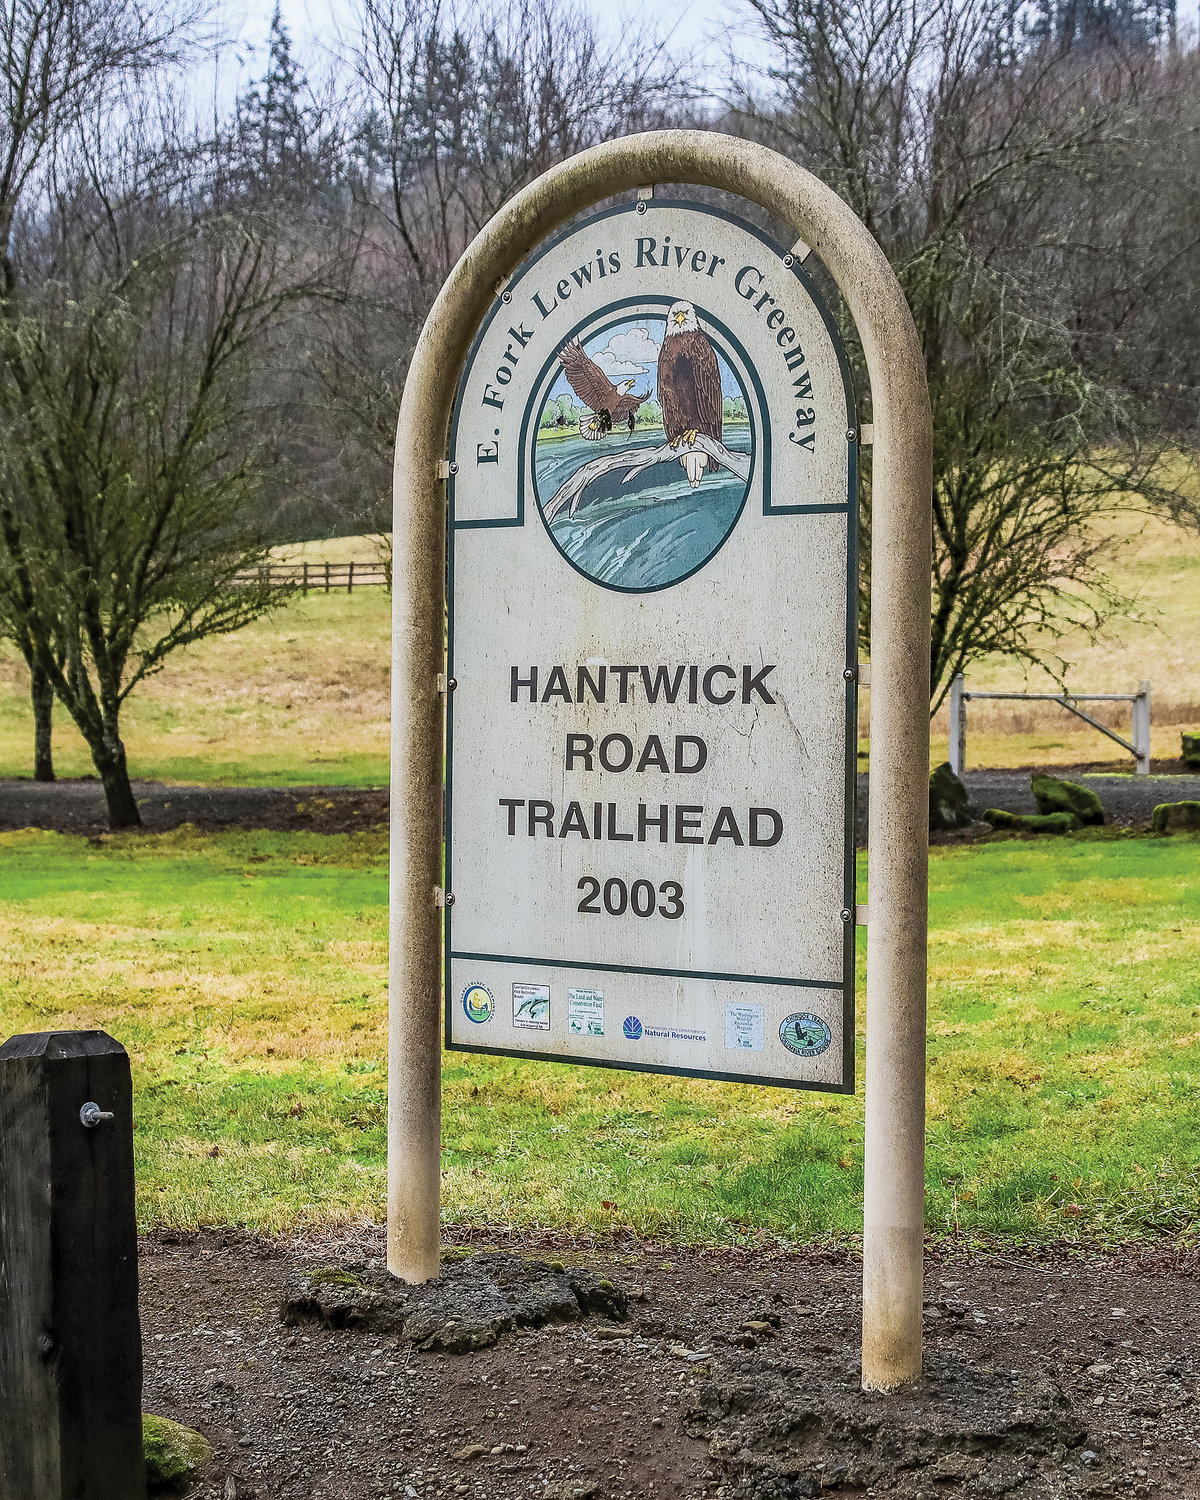 The sign to the Hantwick Road Trailhead is pictured. Clark County recently acquired land along the trail.